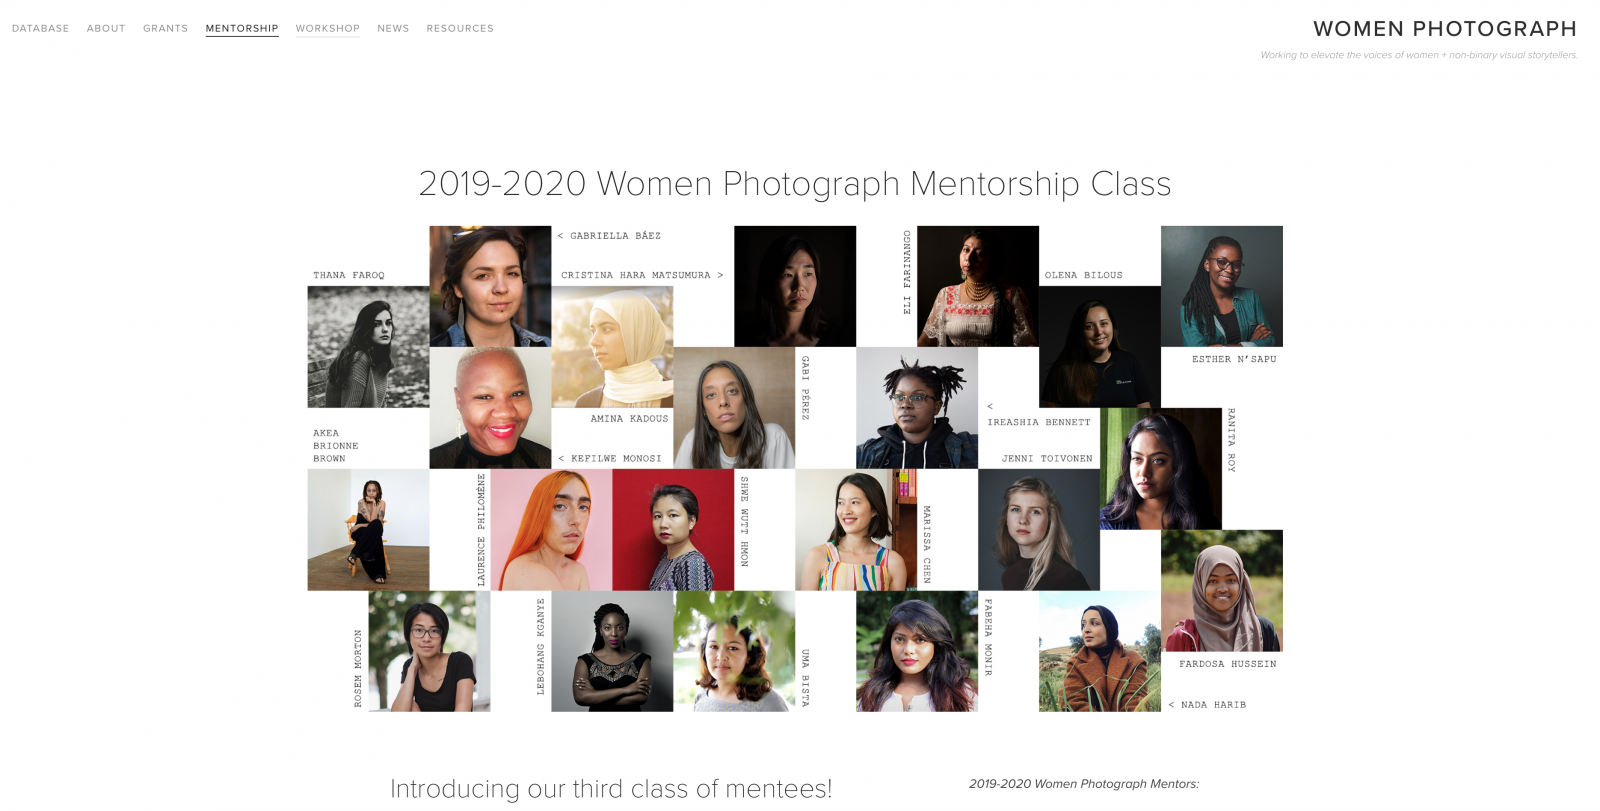 Excited to join the Women Photograph Mentorship Class 2019-2020! 